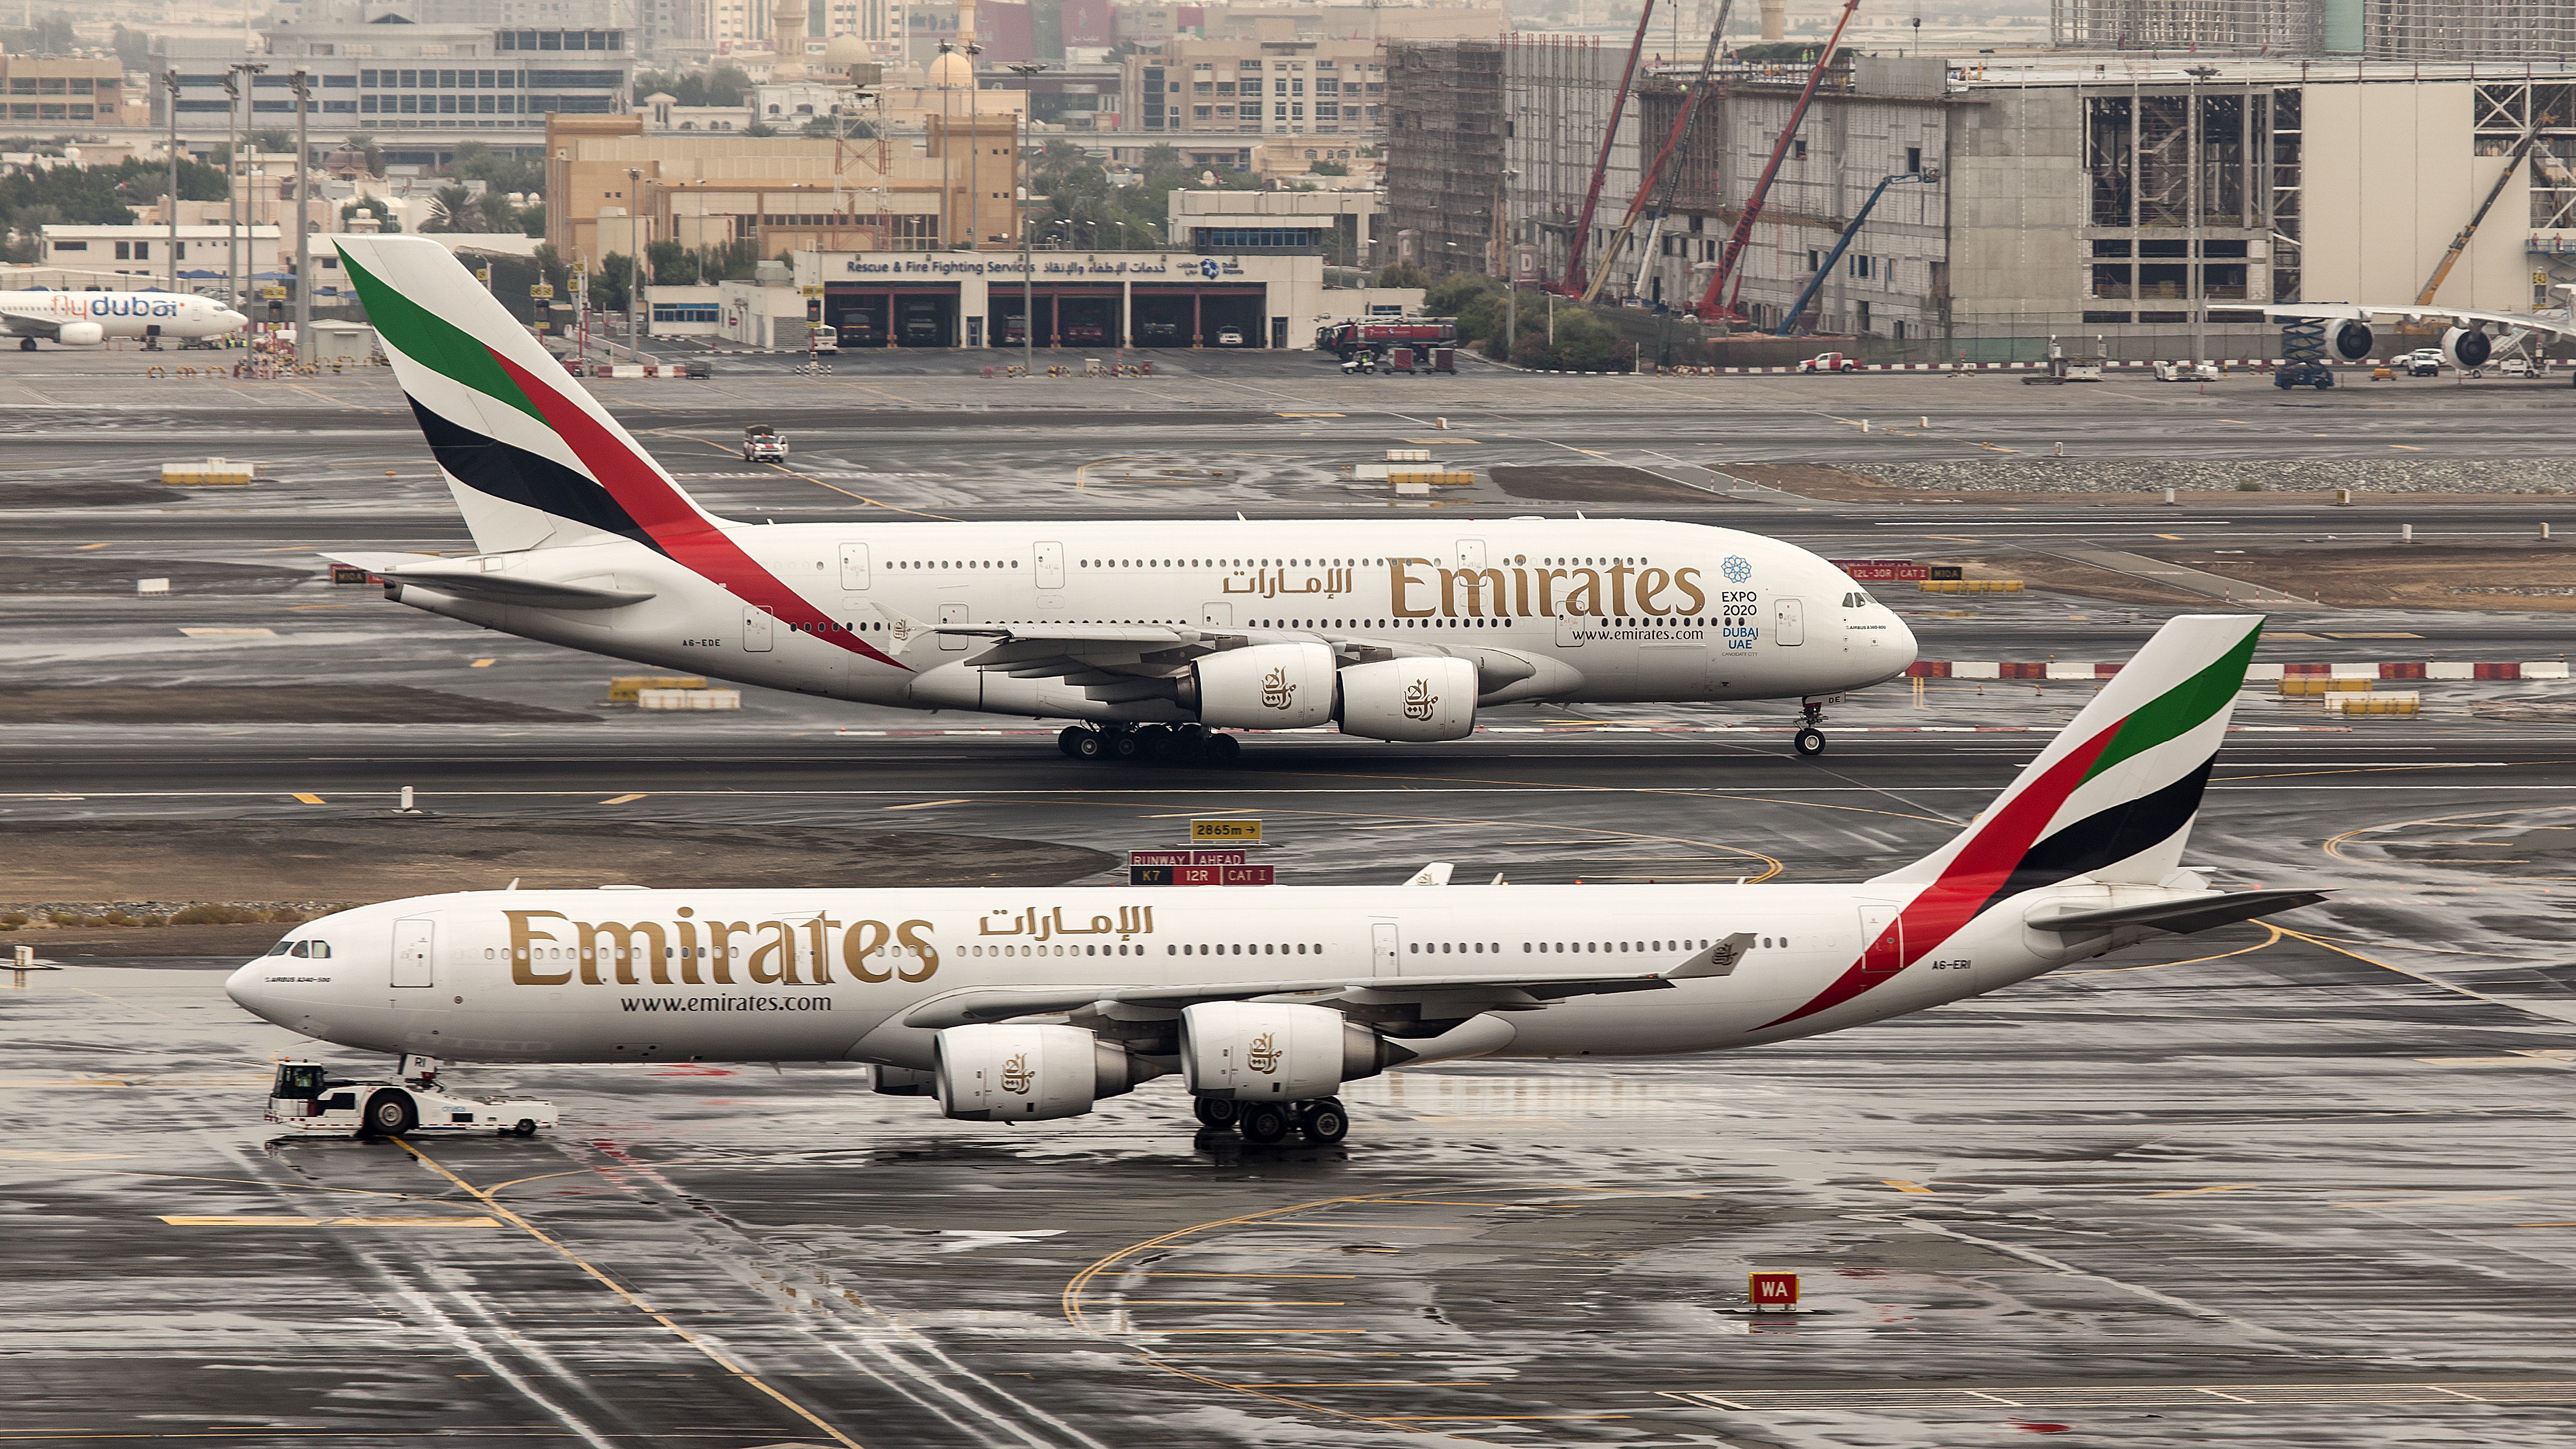 Emirates A340 and A380 on tarmac